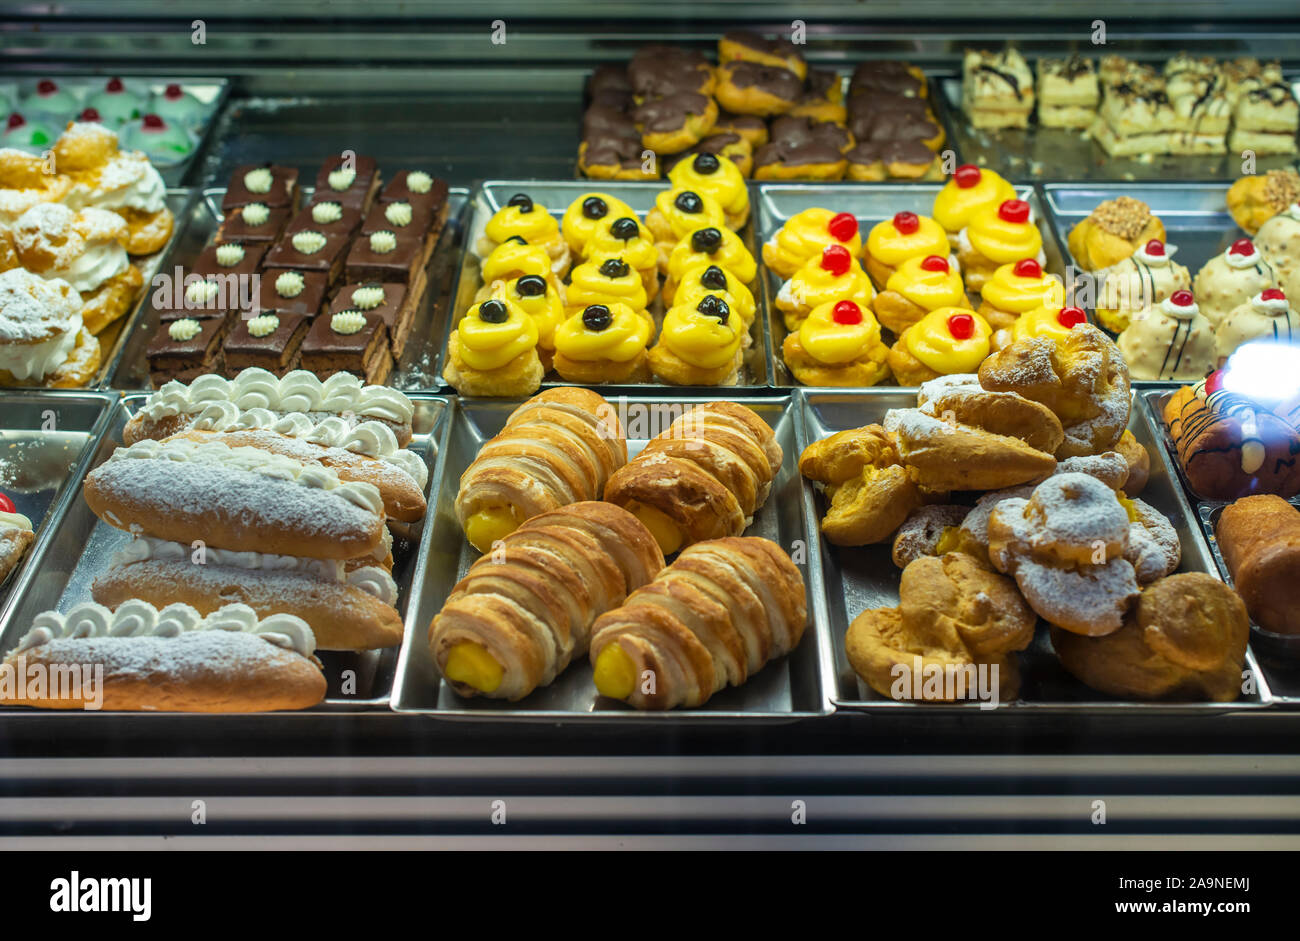 Italian pastry shop. Showcase on pastry shop. Cream and sweets. Stock Photo